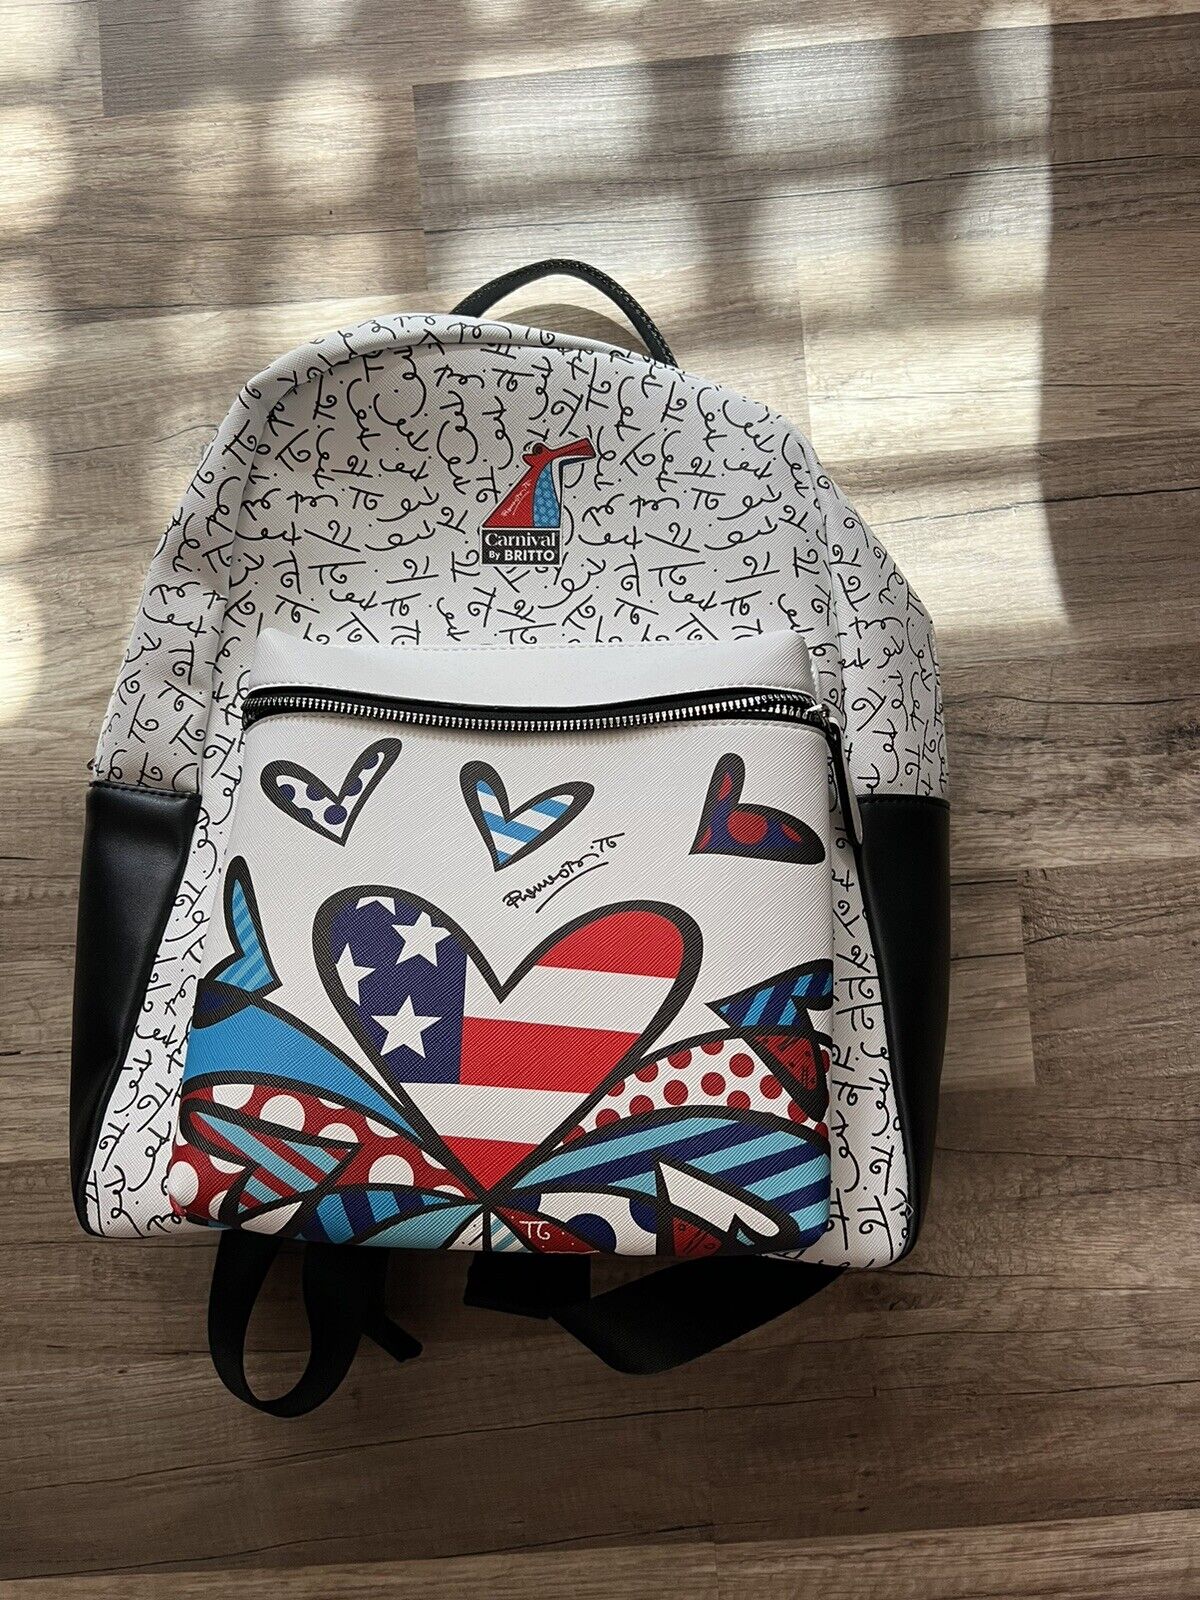 CARNIVAL by BRITTO, Cruise Backpack NWT Romero Britto Pop Artist SOLD OUT